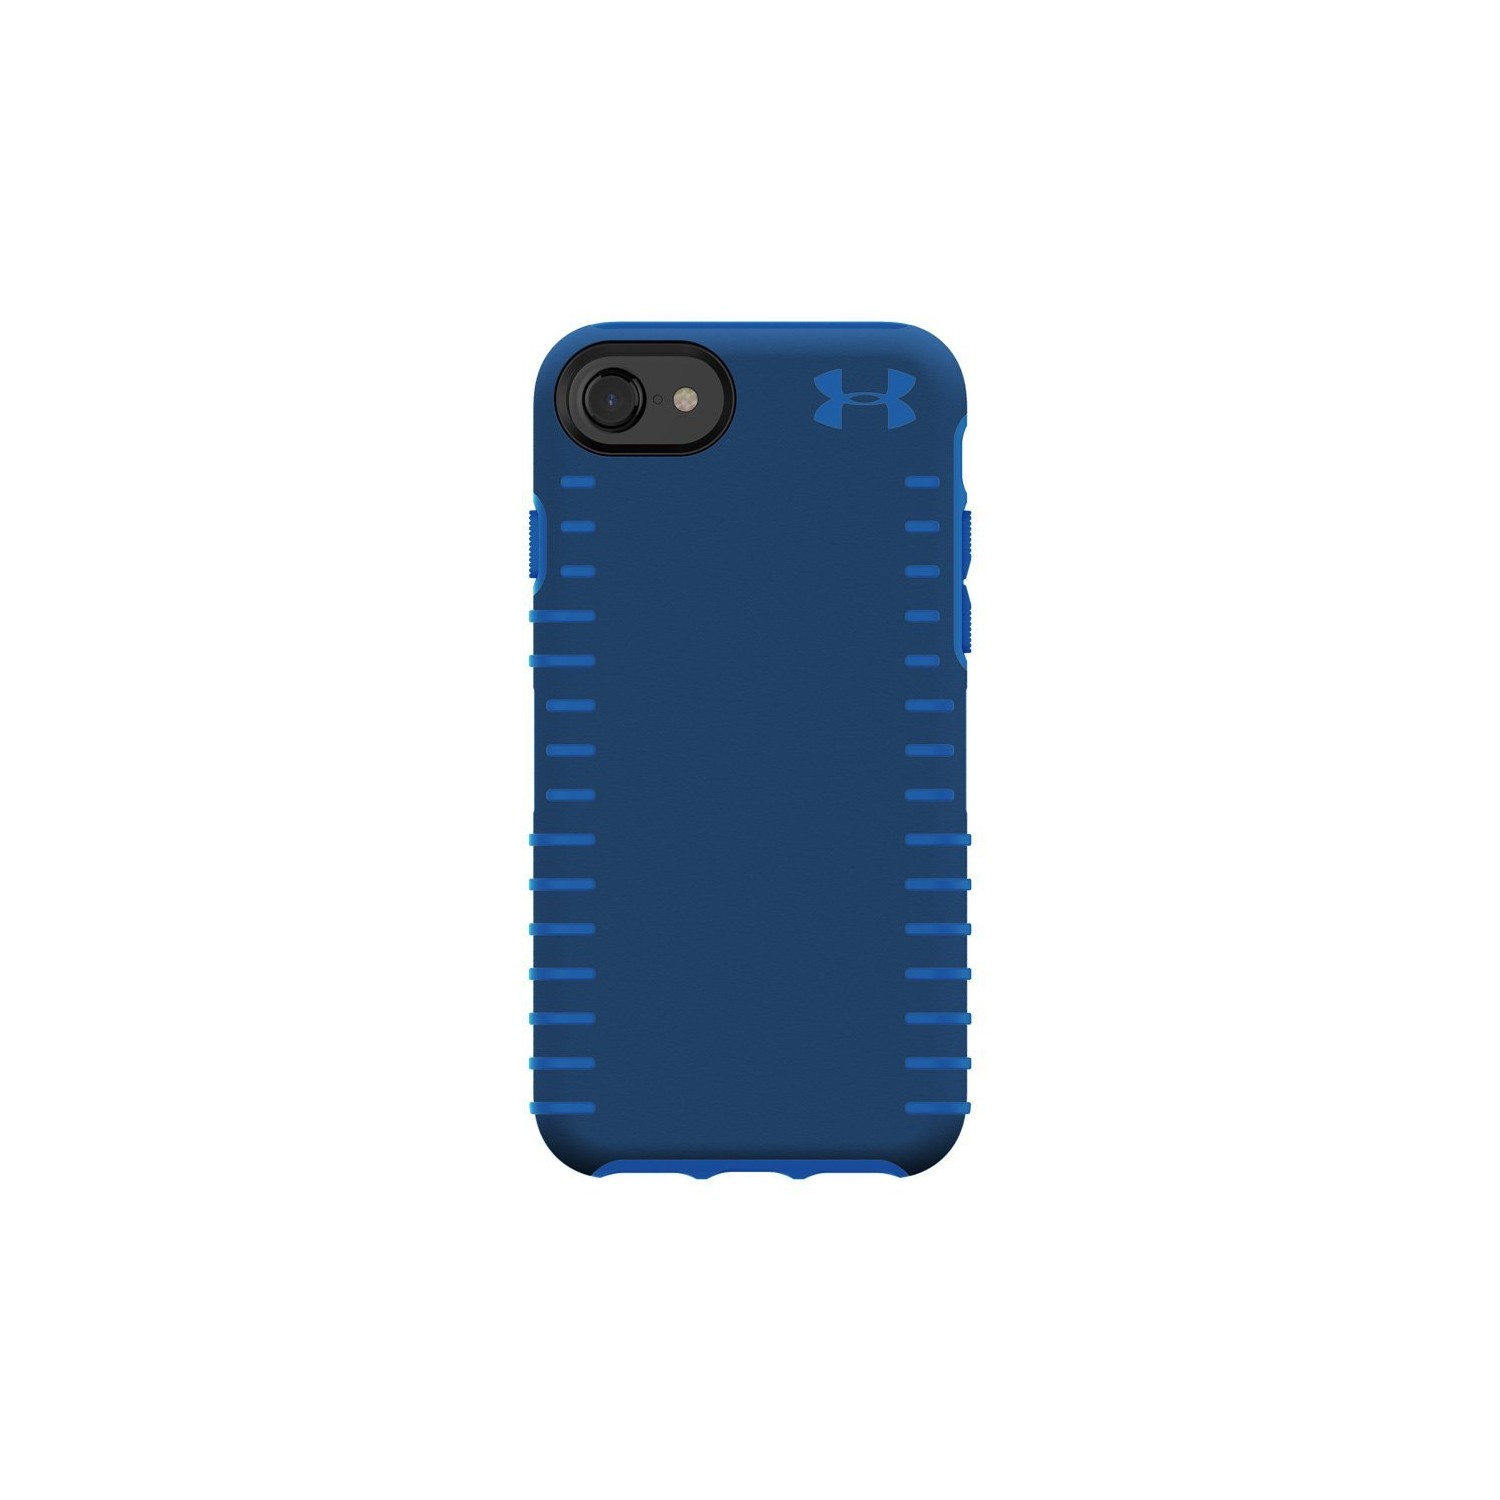 Under Armour Fitted Hard Shell Case for iPhone 6S;iPhone 7;iPhone 6;iPhone 8 - Navy